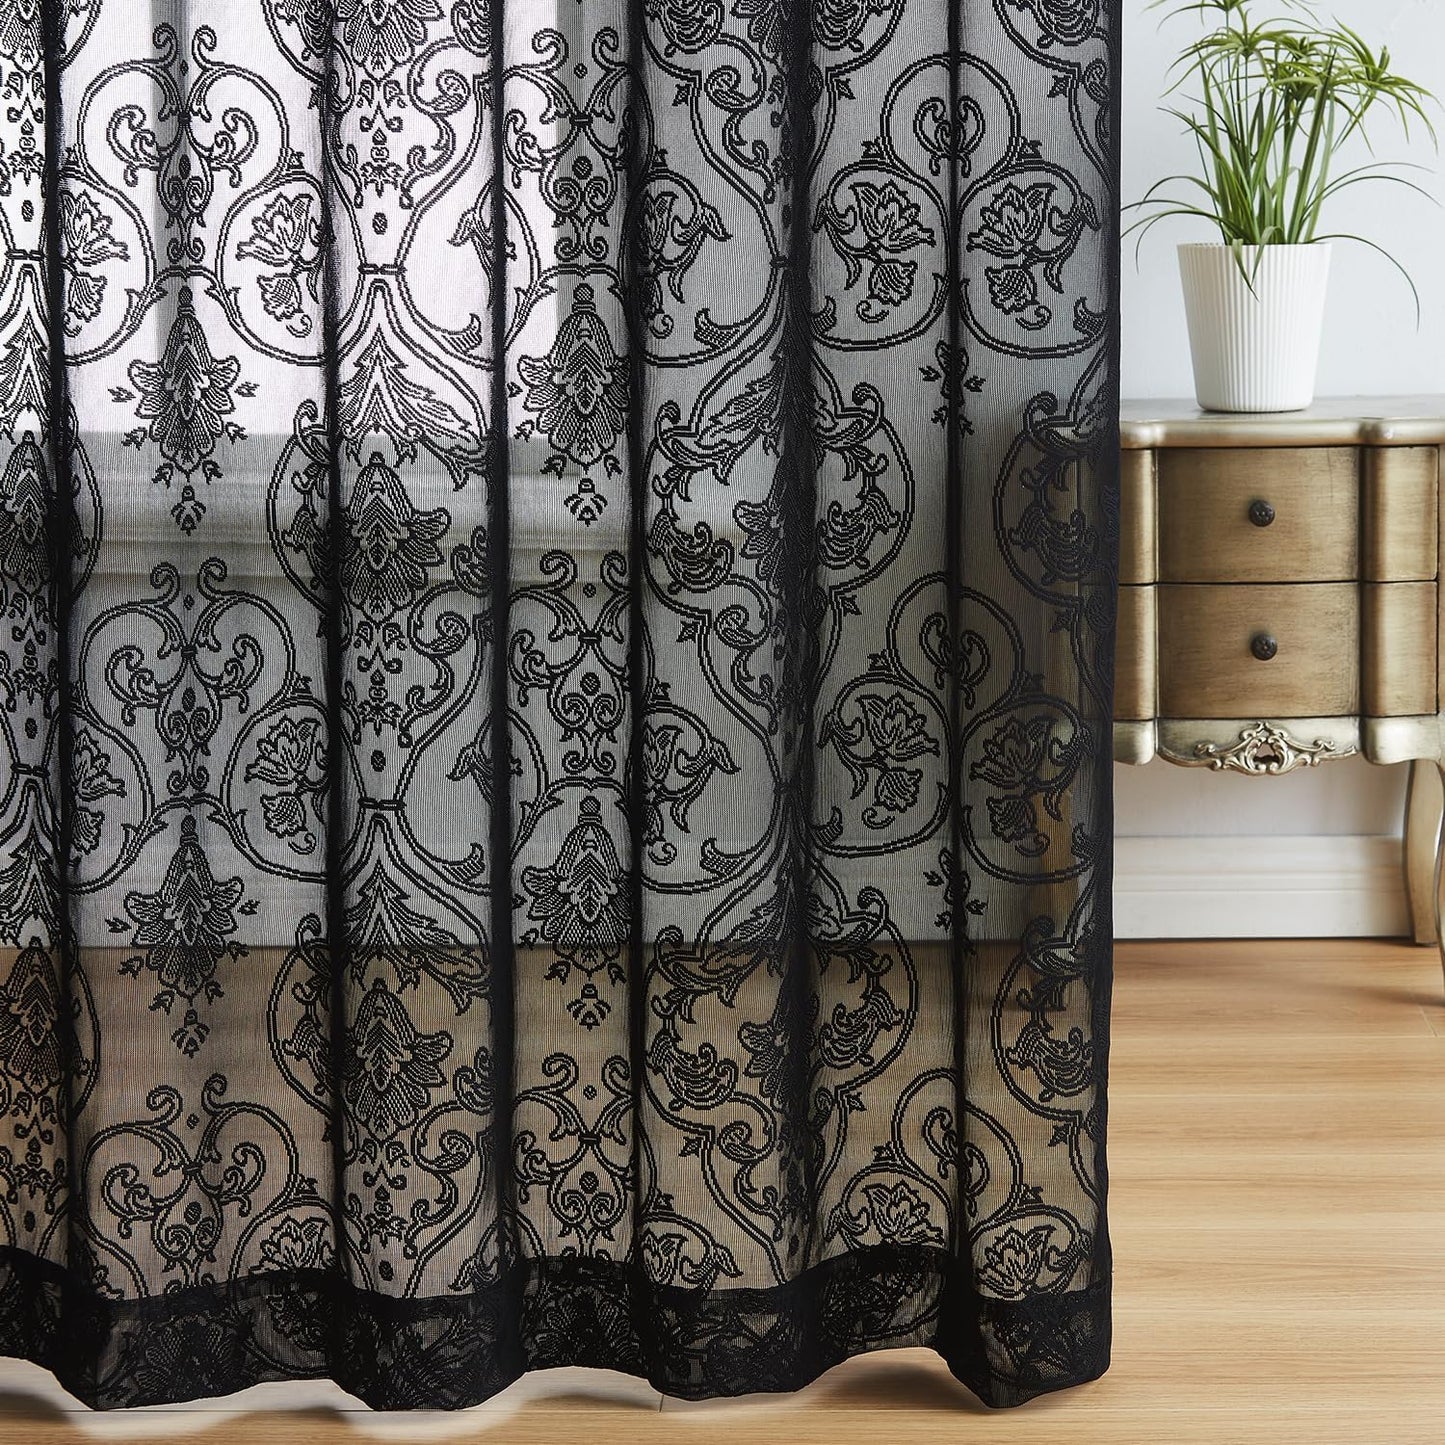 Treatmentex Black Sheer Lace Curtains for Bedroom Living Room Studio 84Inch Long Vintage Rose Floral Embroidered Semi Sheer Curtain Panels Privacy Leaf Sheer Drapes with Scalloped Edge 54" W 2Pcs 7Ft  Treatmentex Damask - Black 52"W X 95"L 2Pcs 